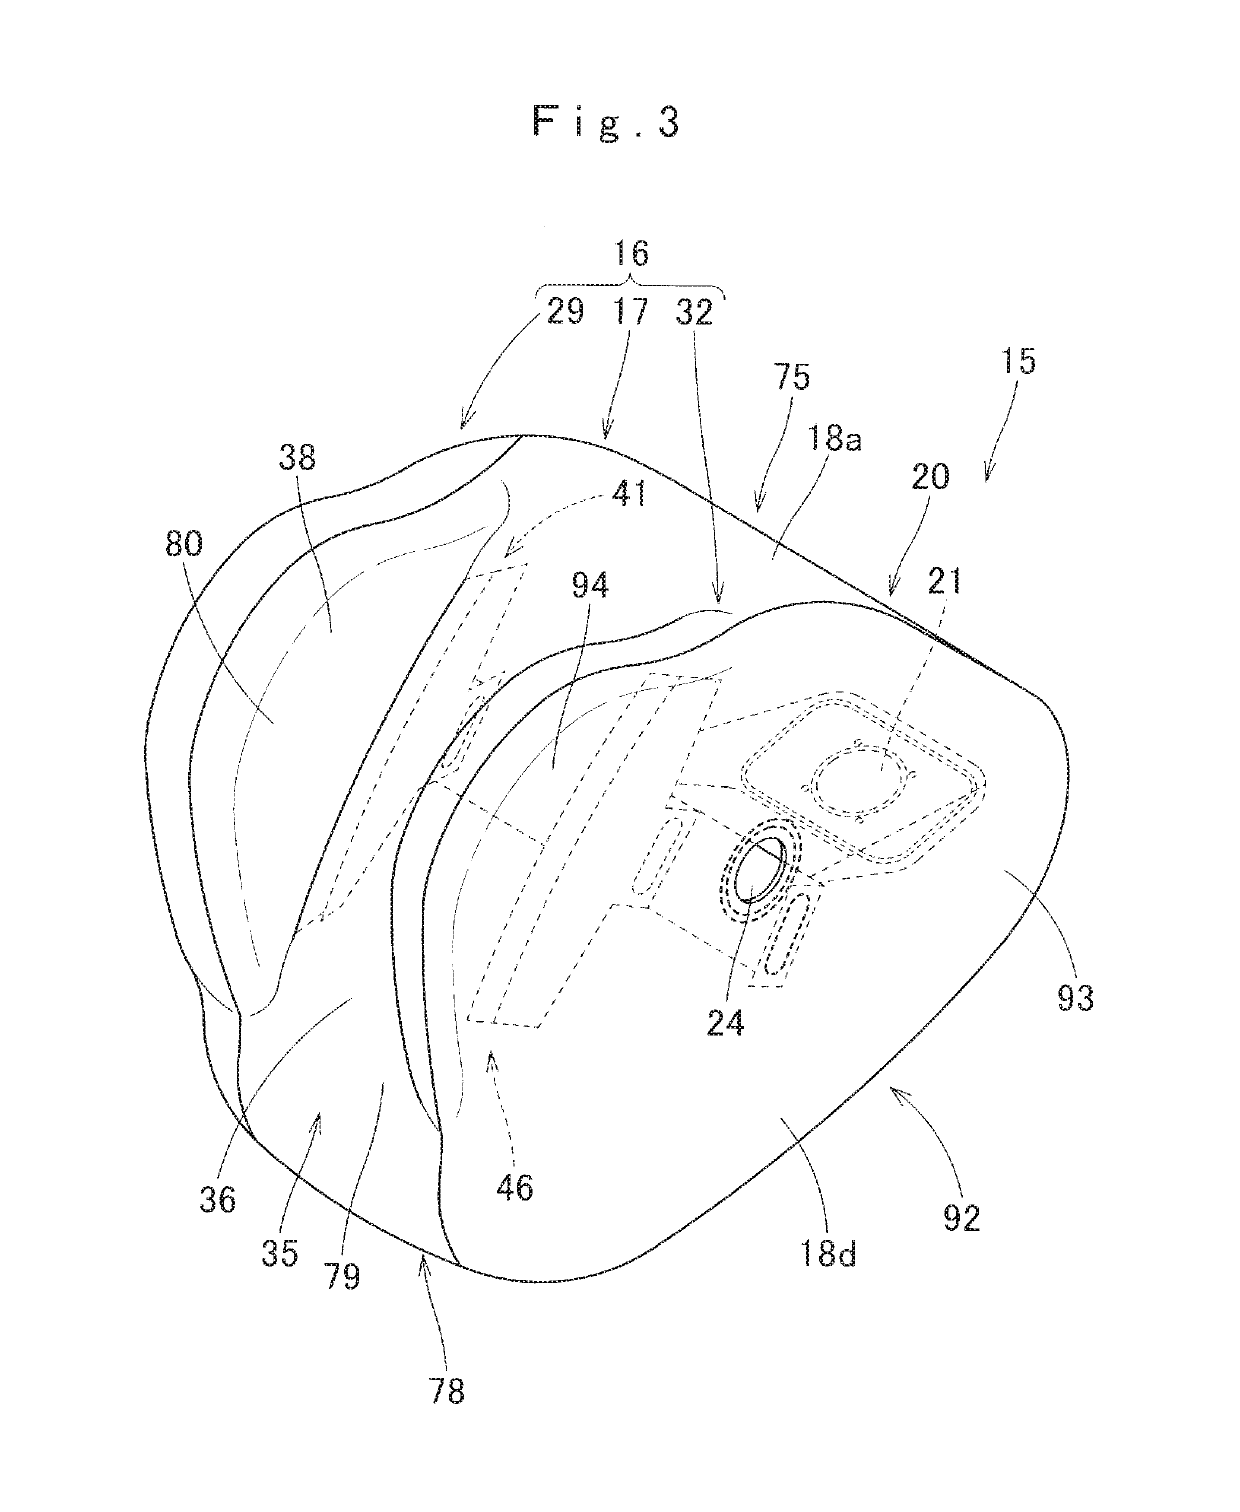 Airbag device for a passenger seat